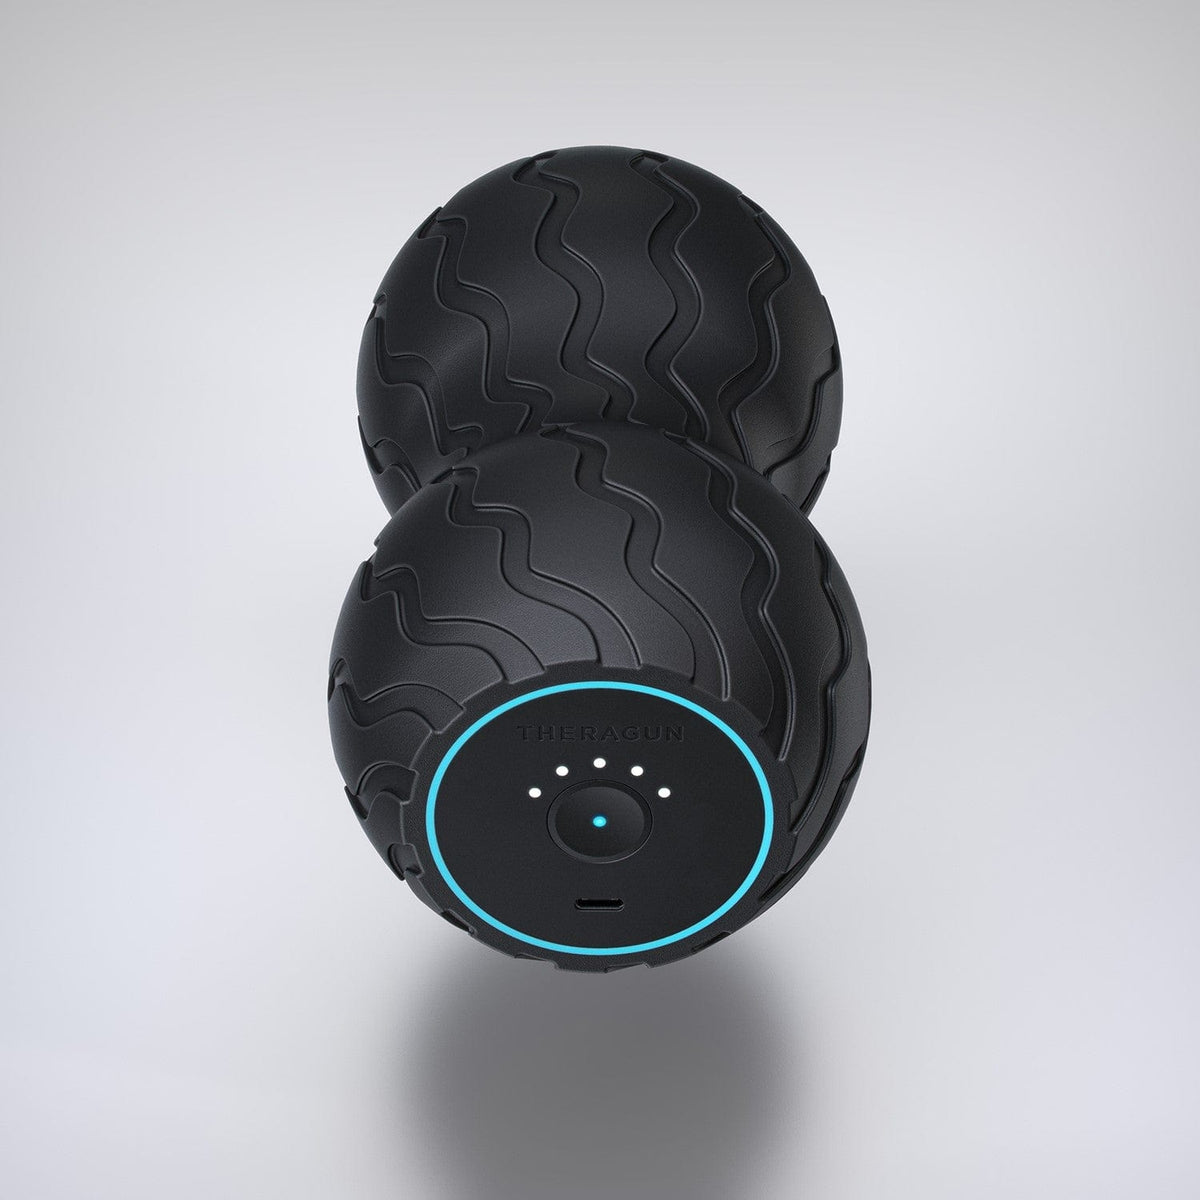 Theragun Wave Duo Smart Vibrating Roller Massager